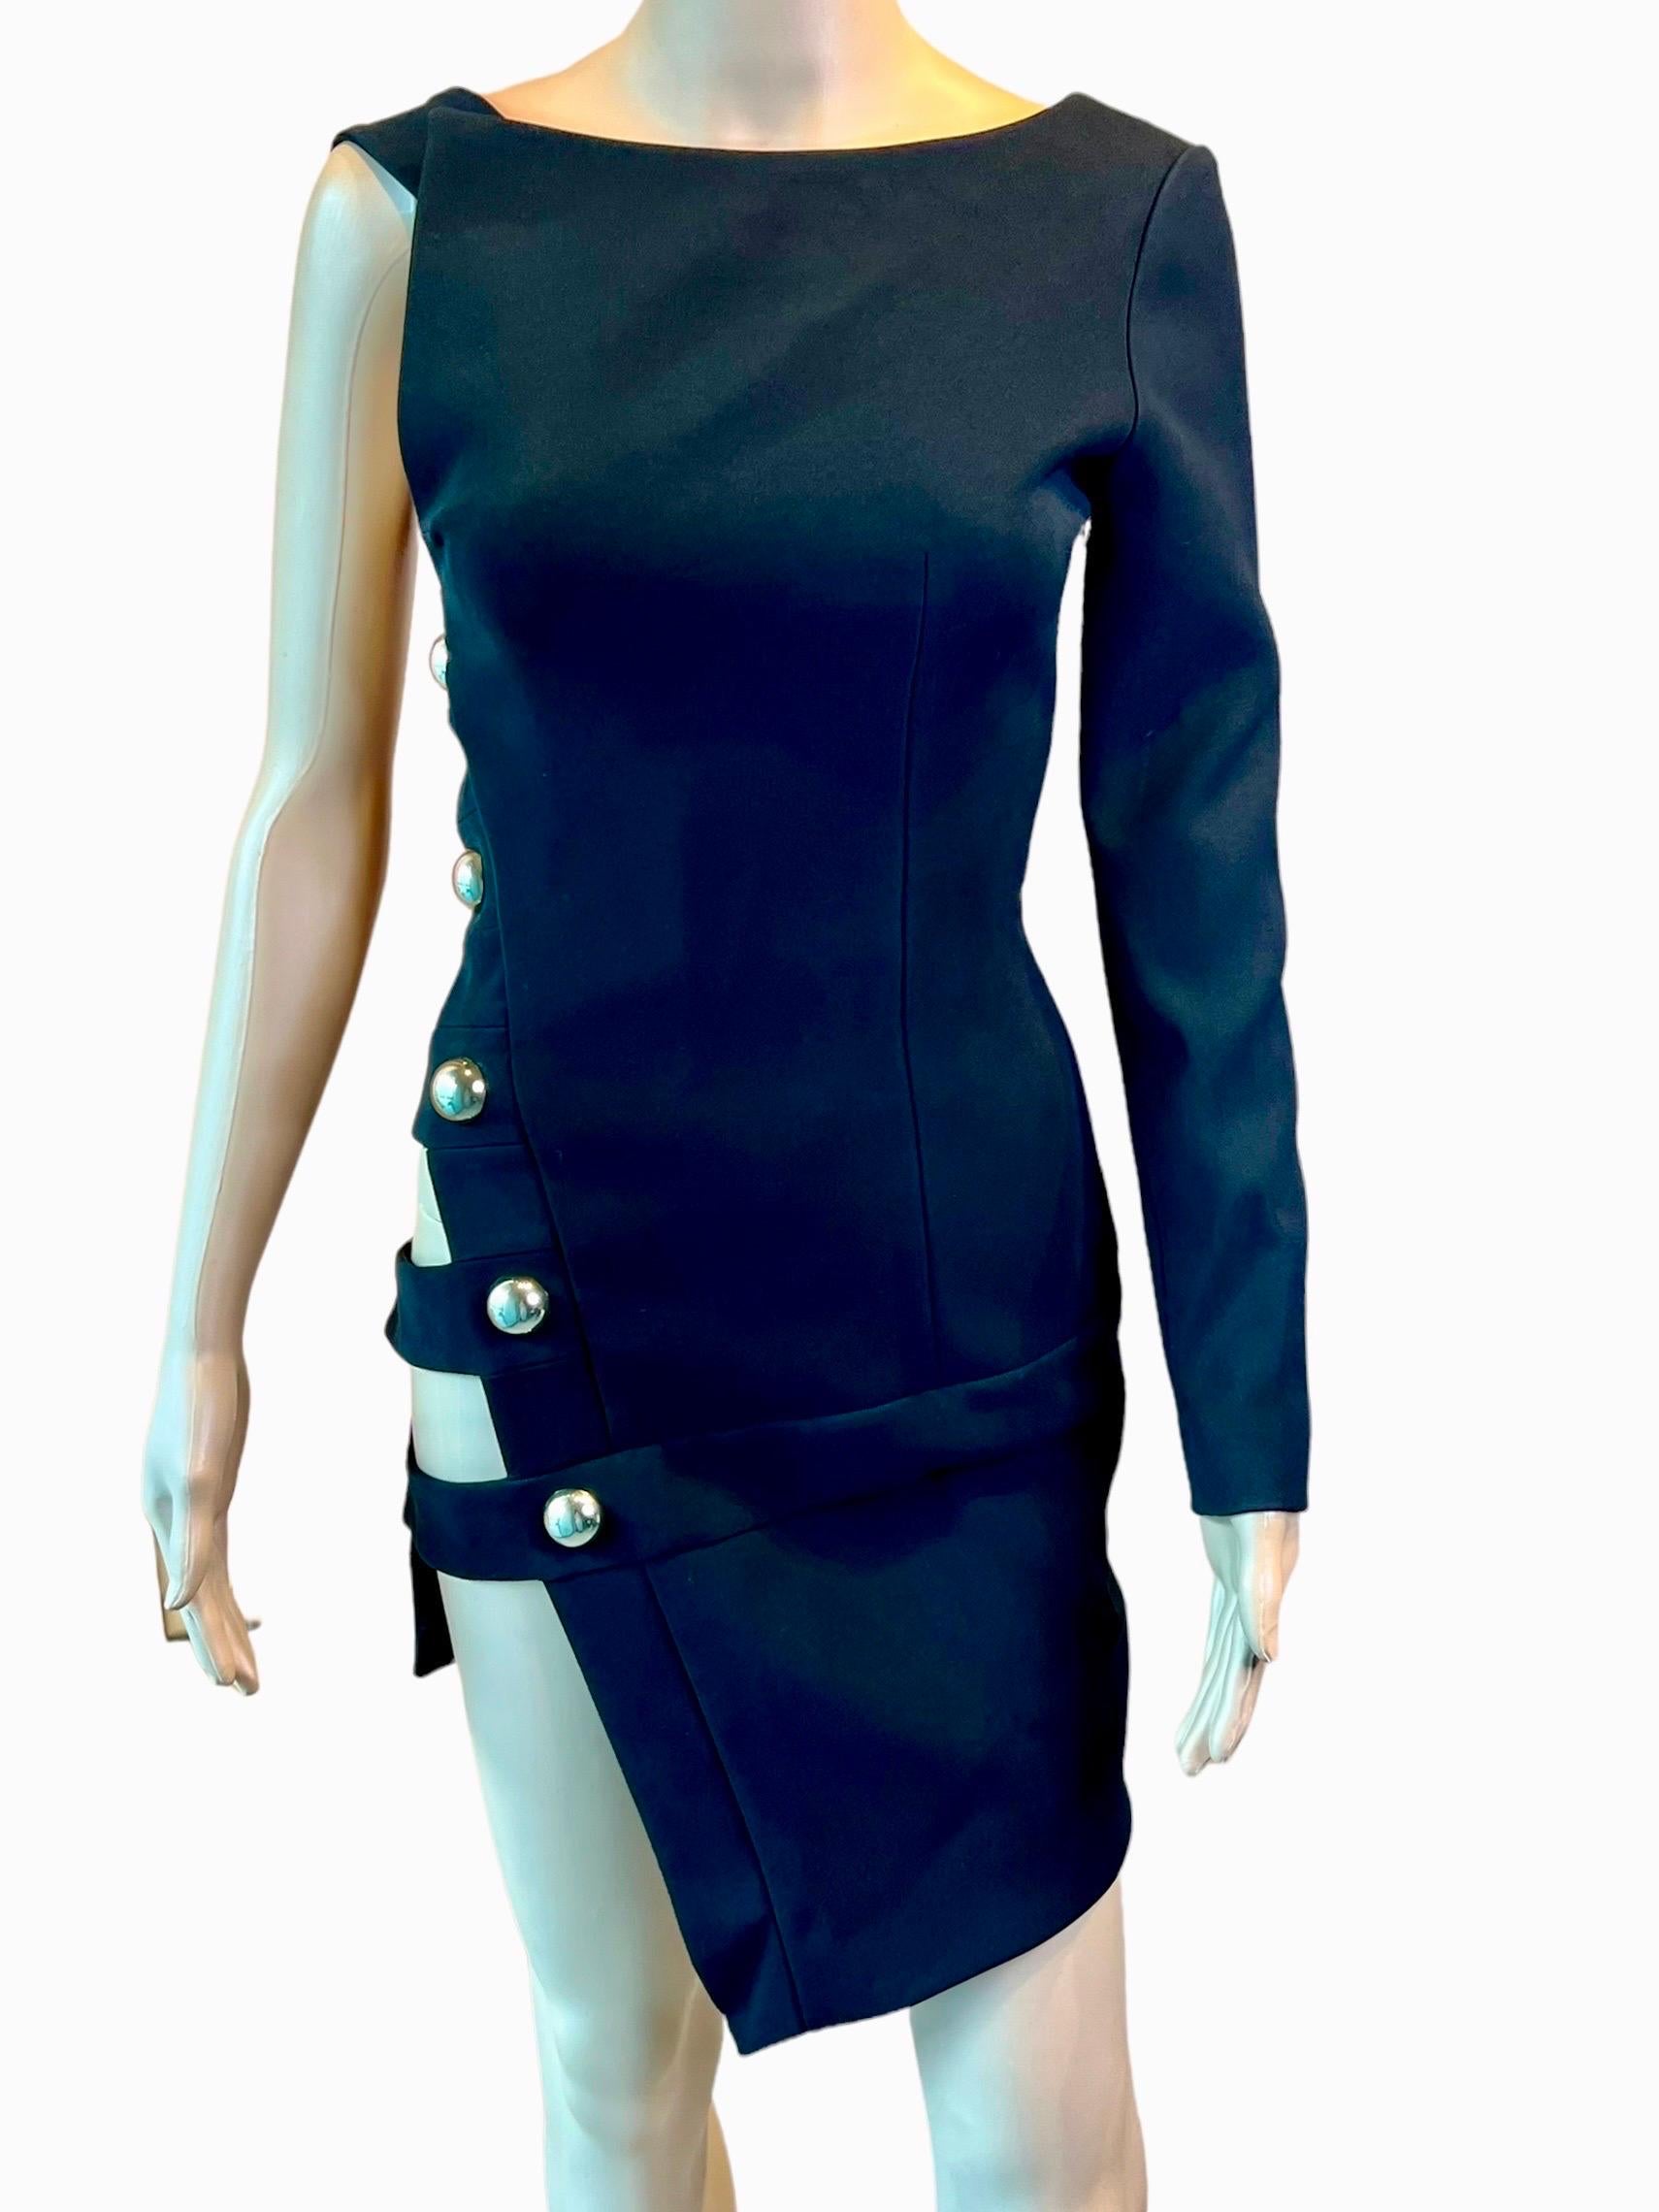 Anthony Vaccarello S/S 2014 Runway Cutout One Sleeve Black Mini Dress For Sale 9